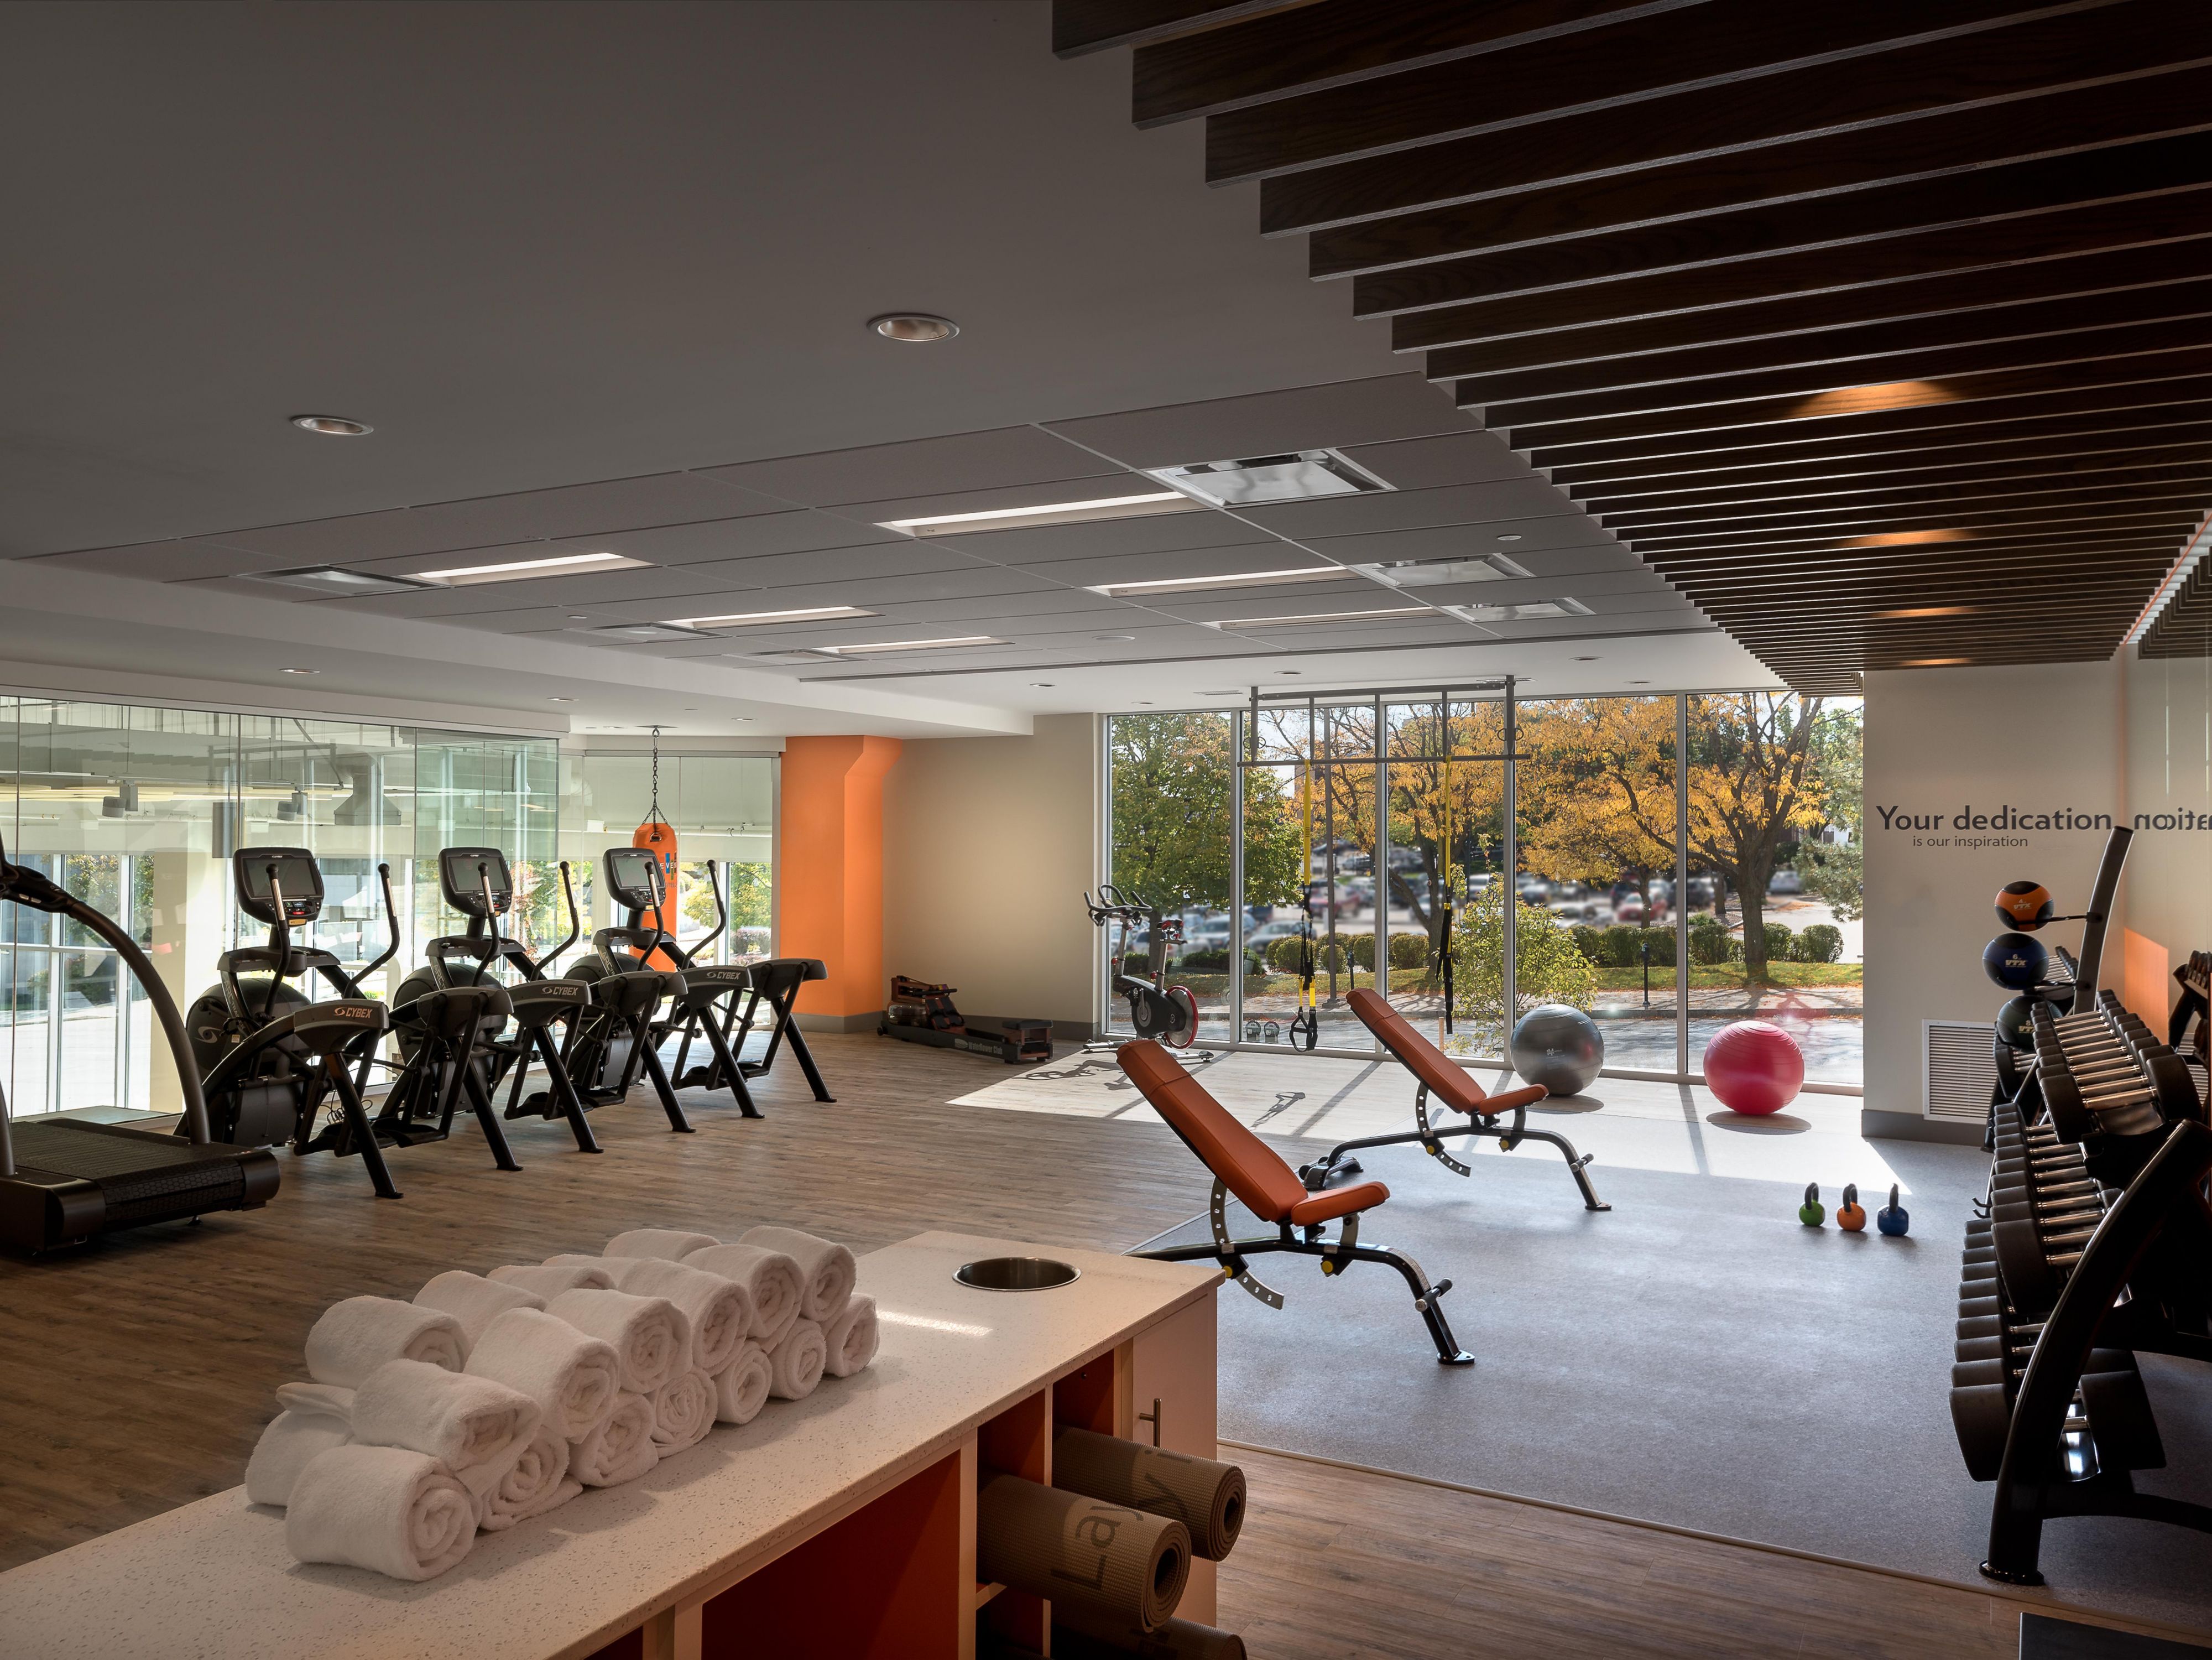 Maintain your fitness routine with 24/7 access to our hotel's gym. Focus on strength, cardio, and flexibility with equipment that rivals most professional Fitness Centers. After, relax in our pristine indoor pool. If you prefer your workouts in the fresh air, visit the front desk for recommendations on the best spots for outdoor exercise.